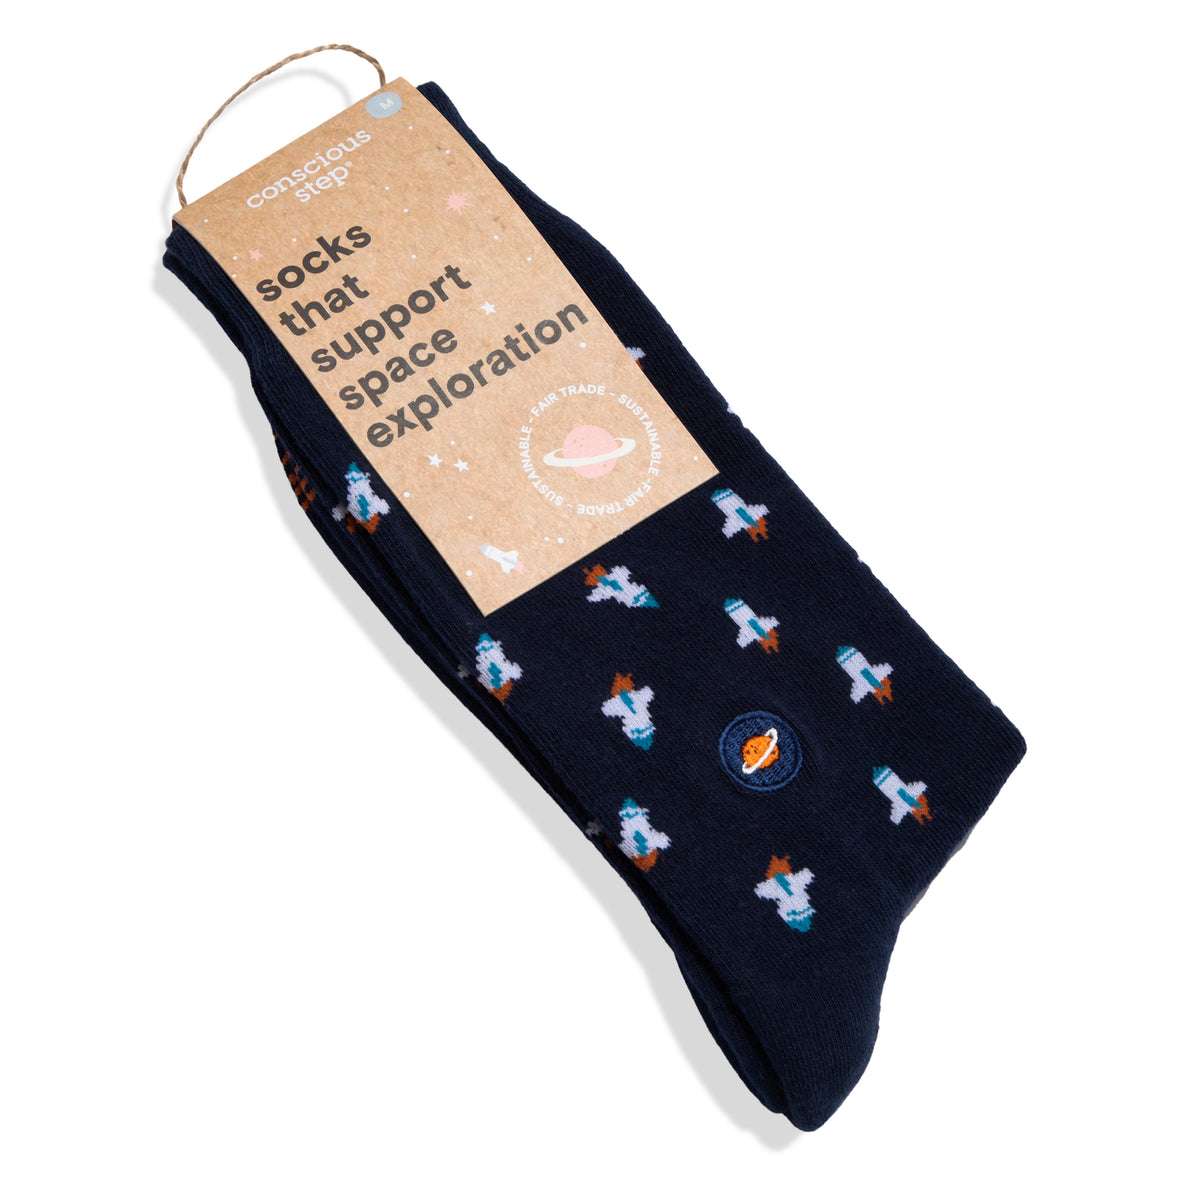 Socks that Support Space Exploration